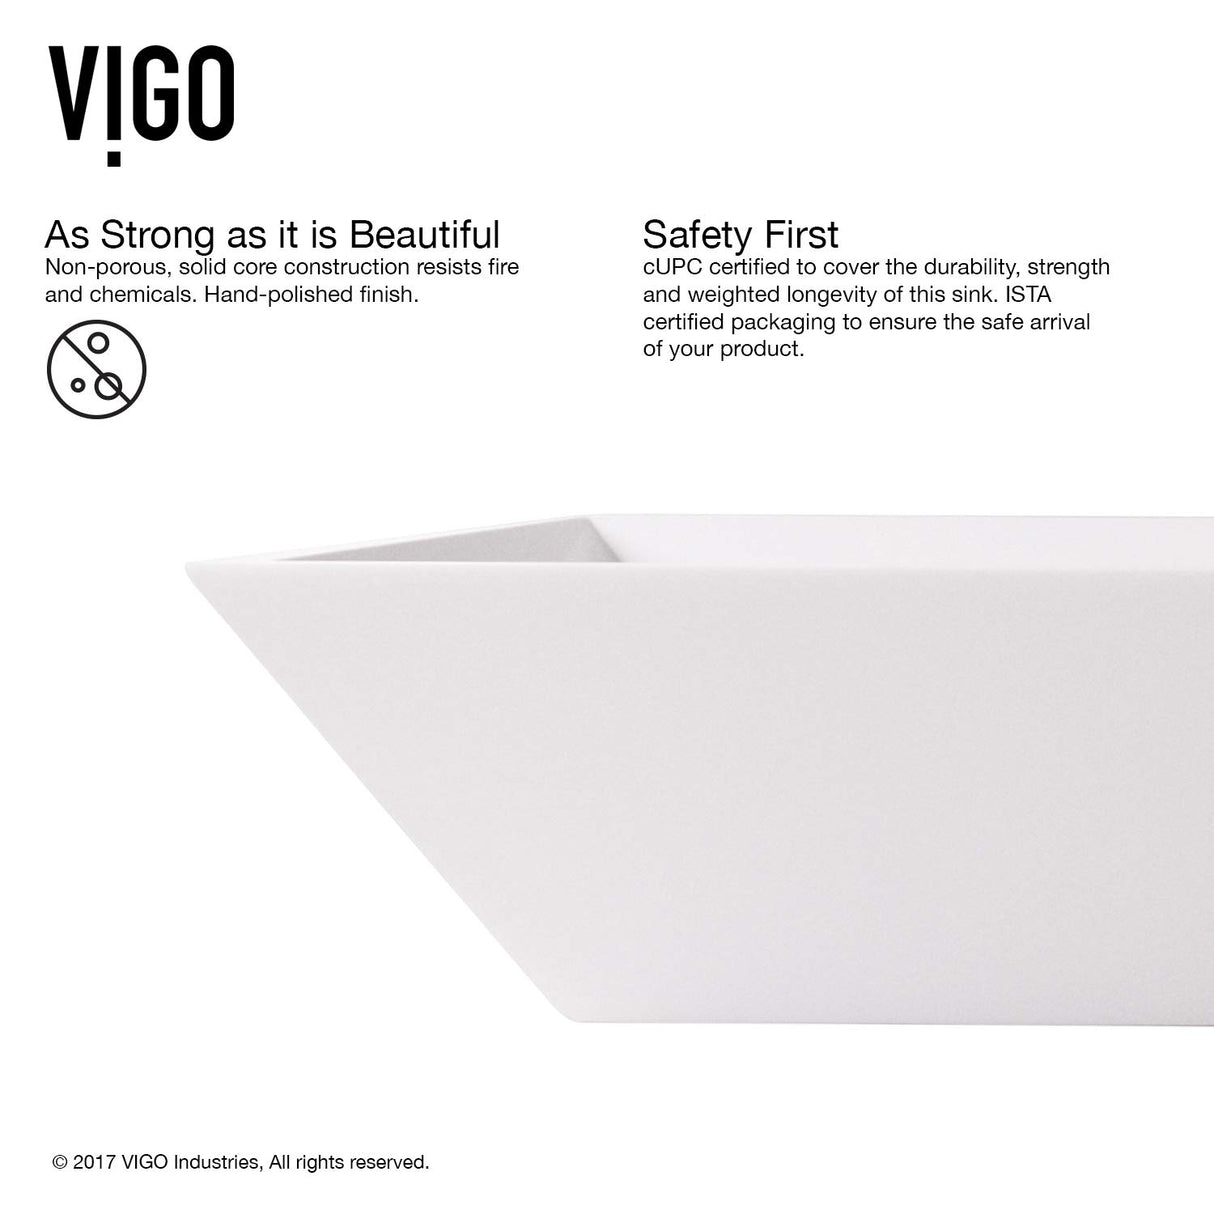 VIGO VGT1212 13.75" L -18.0" W -12.5" H Matte Stone Vinca Composite Rectangular Vessel Bathroom Sink in White with Faucet and Pop-Up Drain in Brushed Nickel